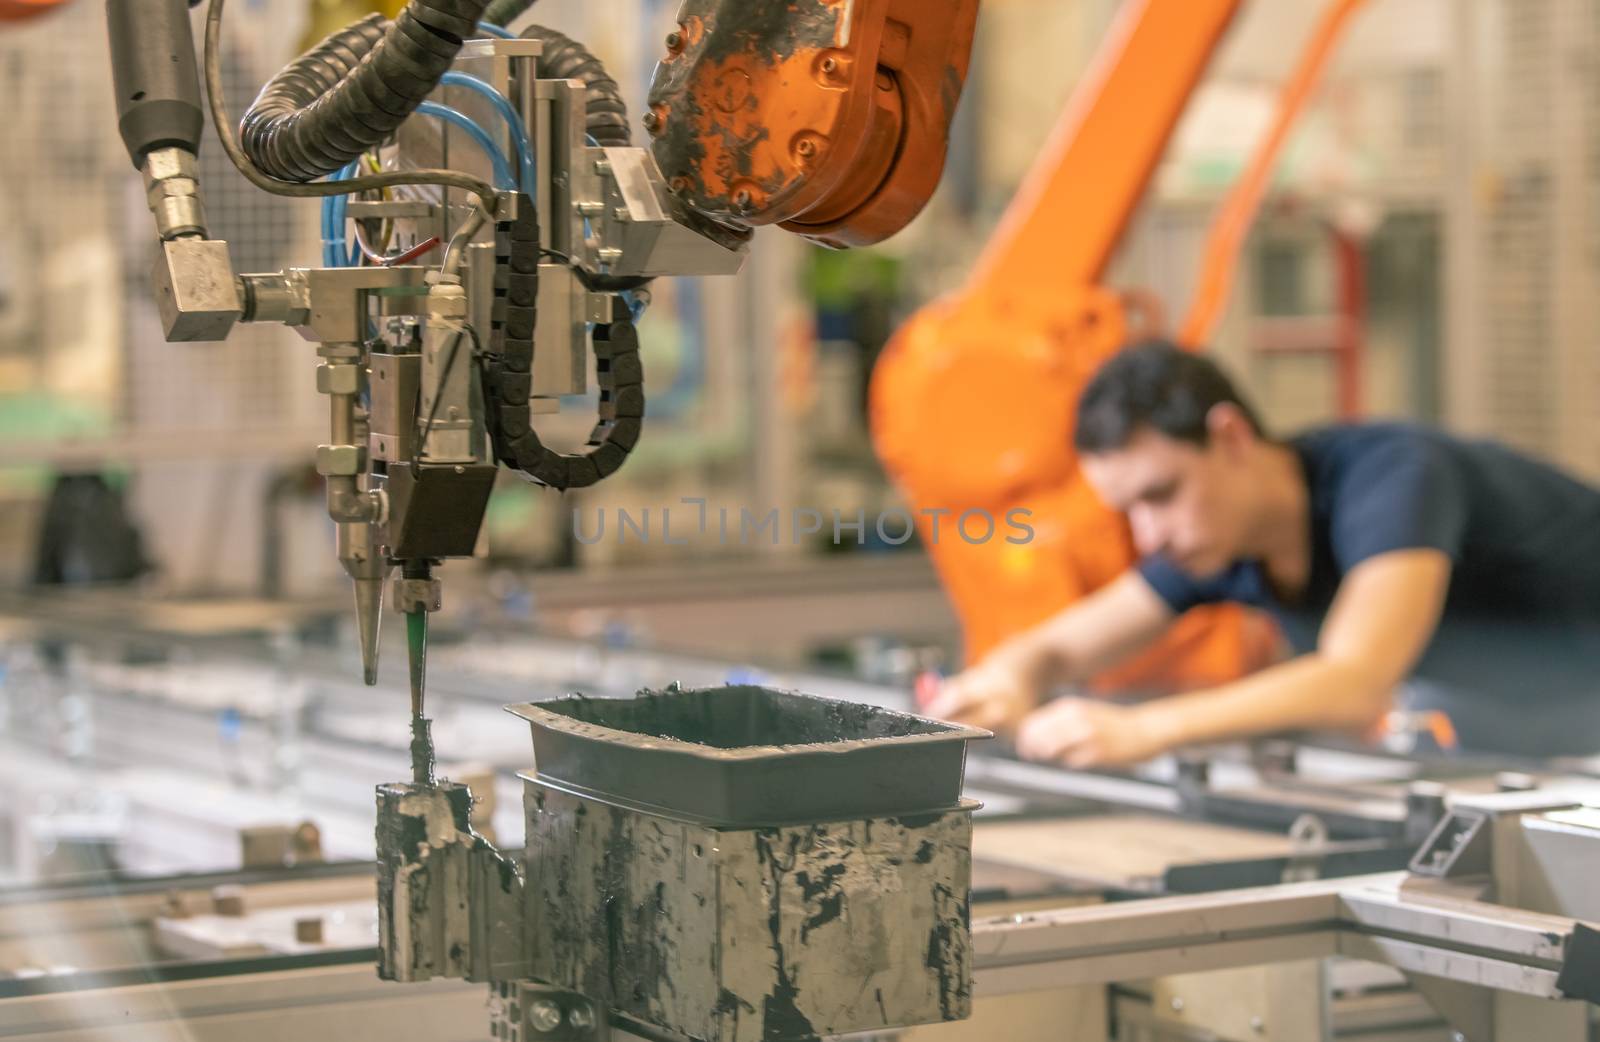 installation of new robot arms in the factory for modernization of production.